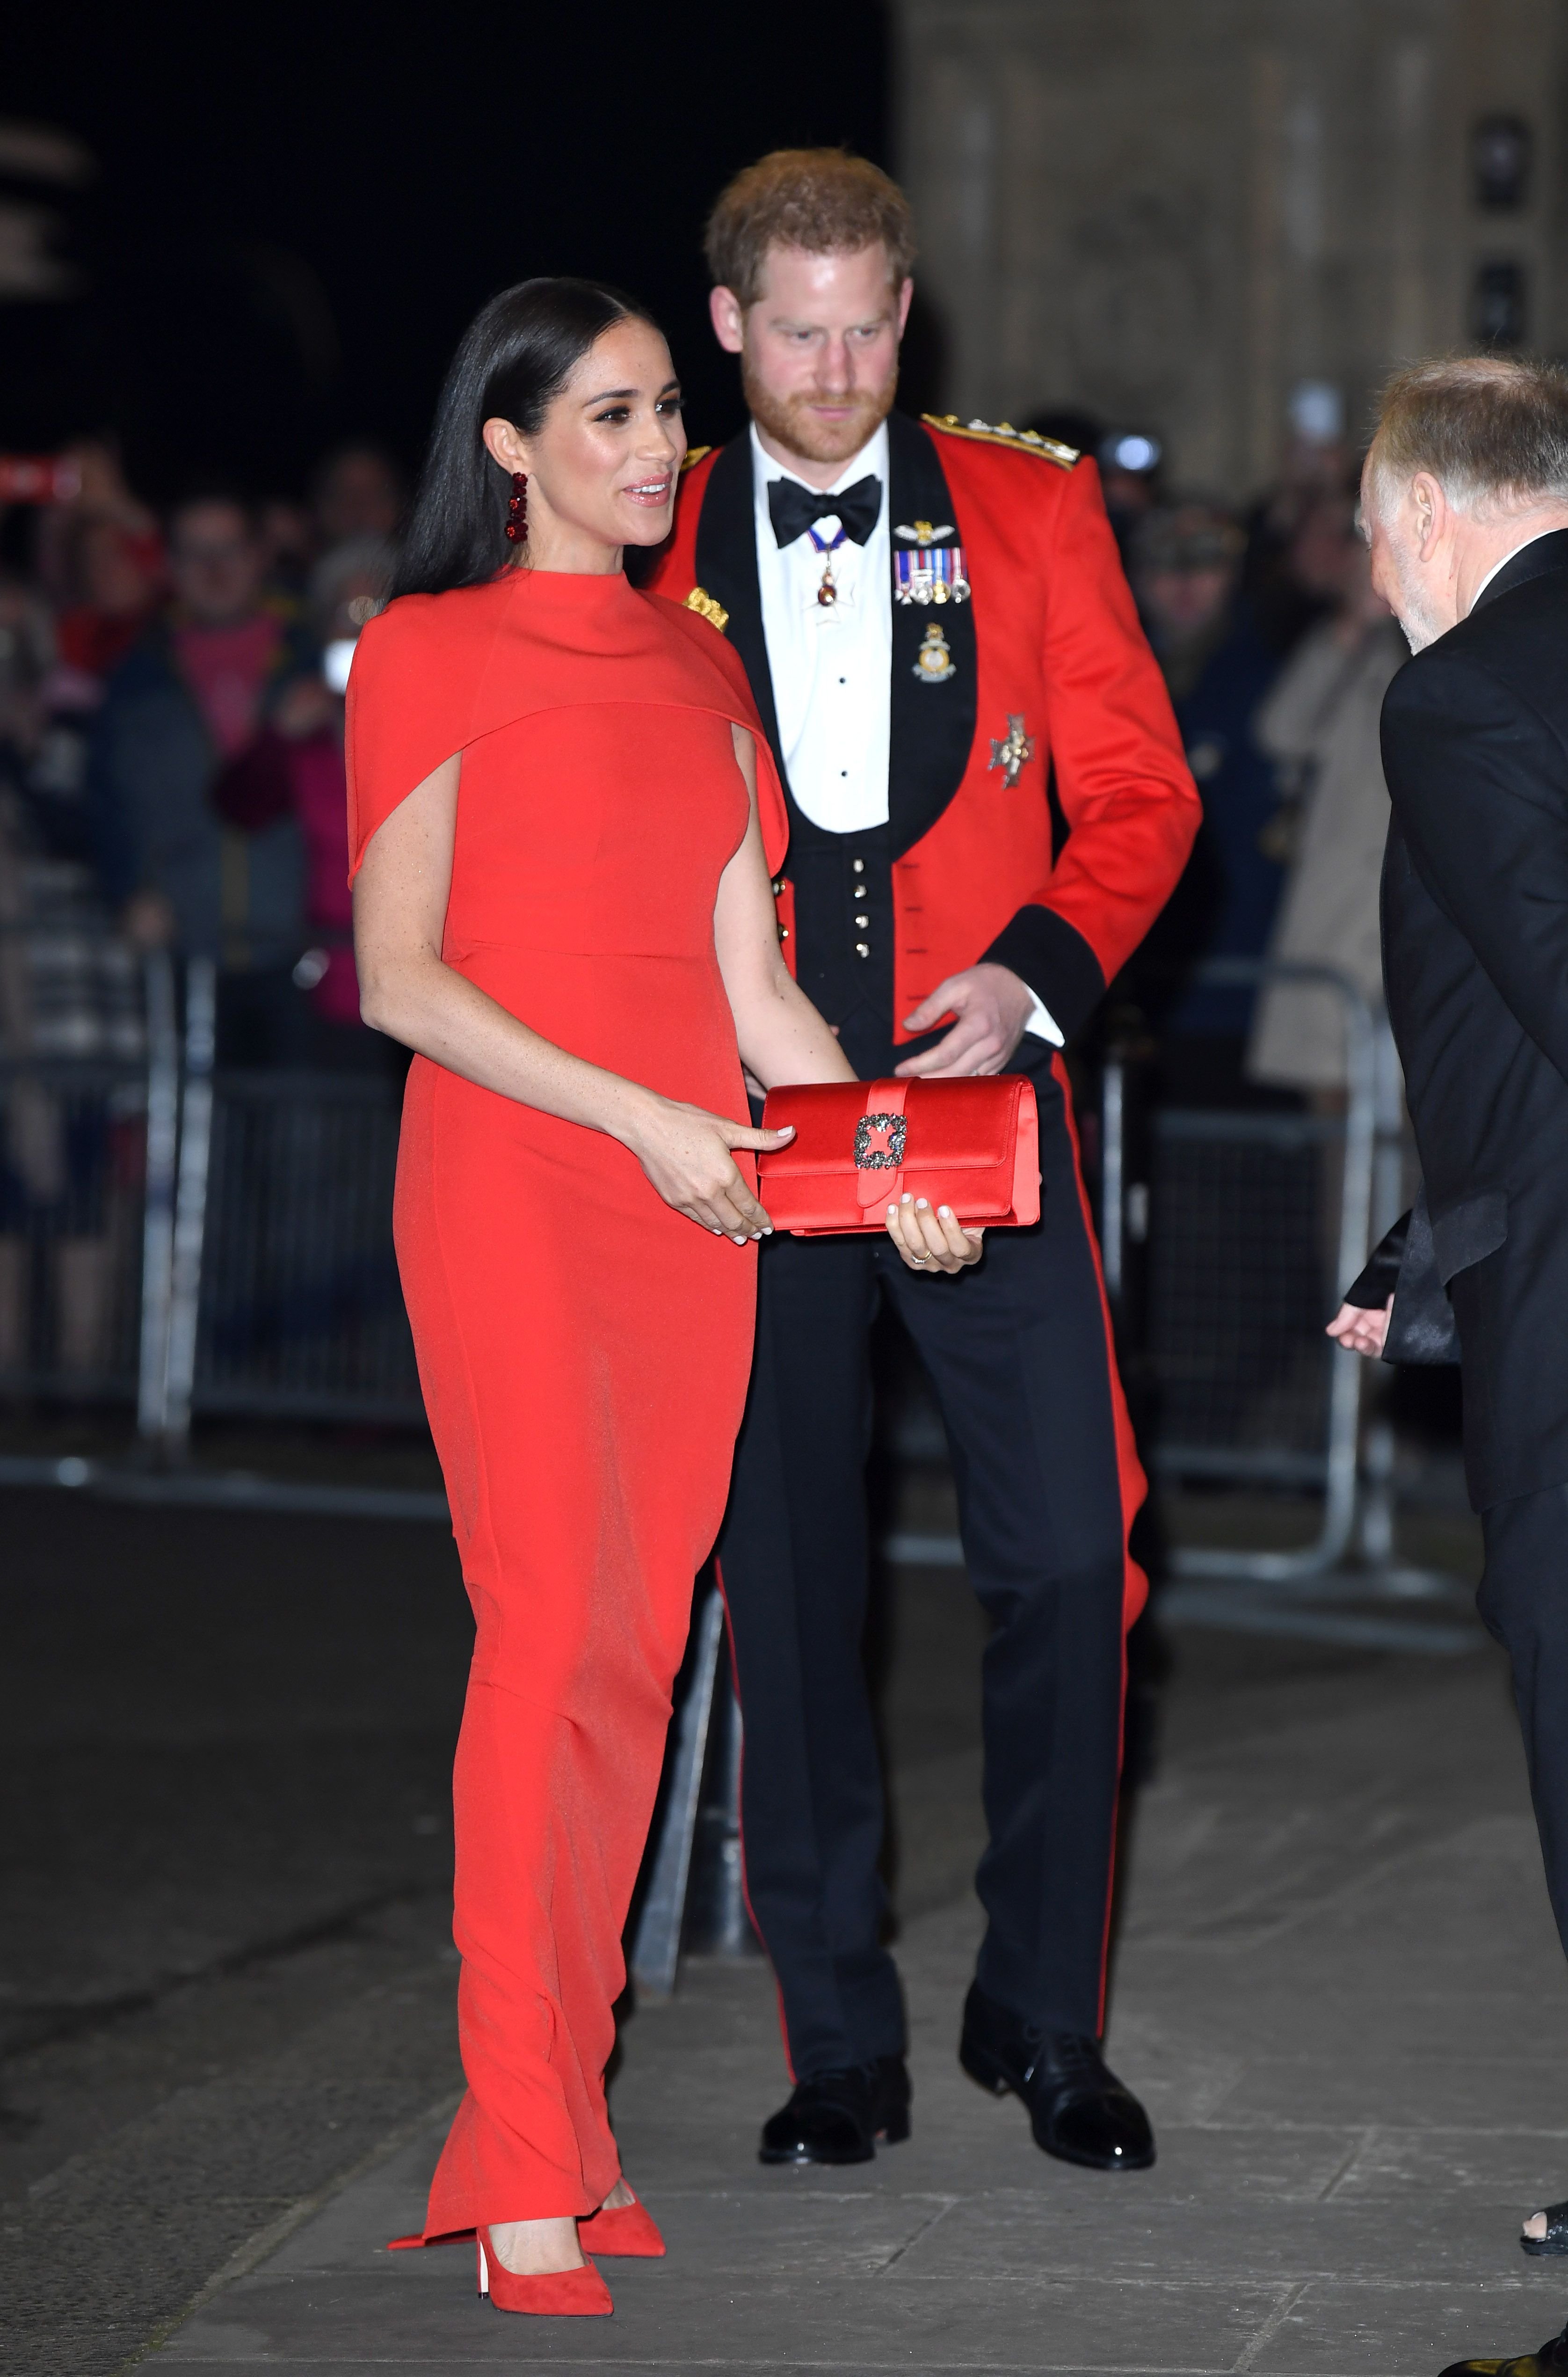 Duchess Meghan and Prince Harry at the Mountbatten Festival of Music on March 07, 2020, in London, England | Photo: Karwai Tang/WireImage/Getty Images